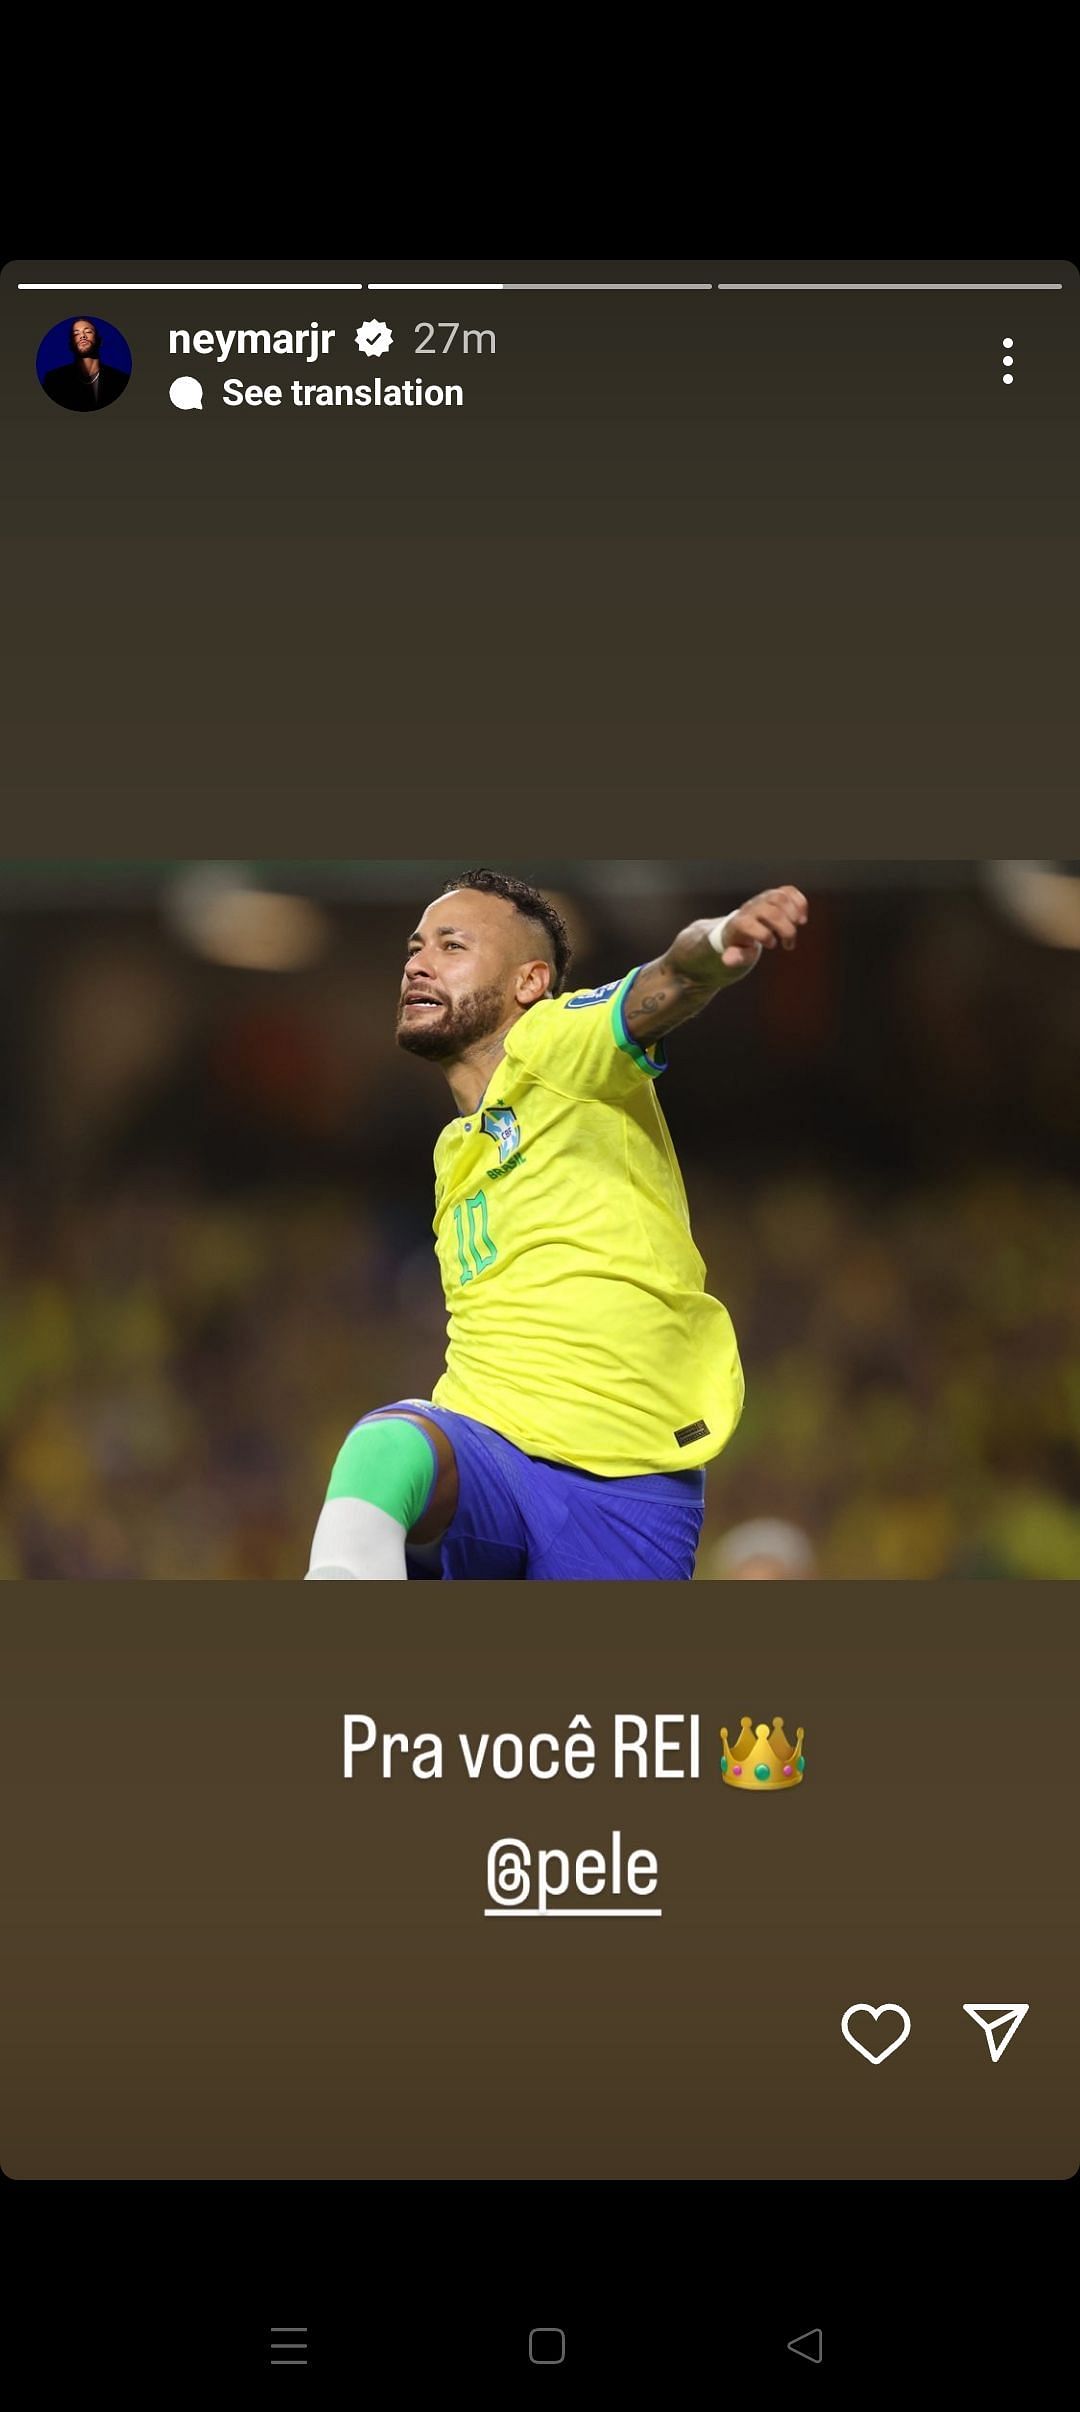 Instagram story and message to Pele